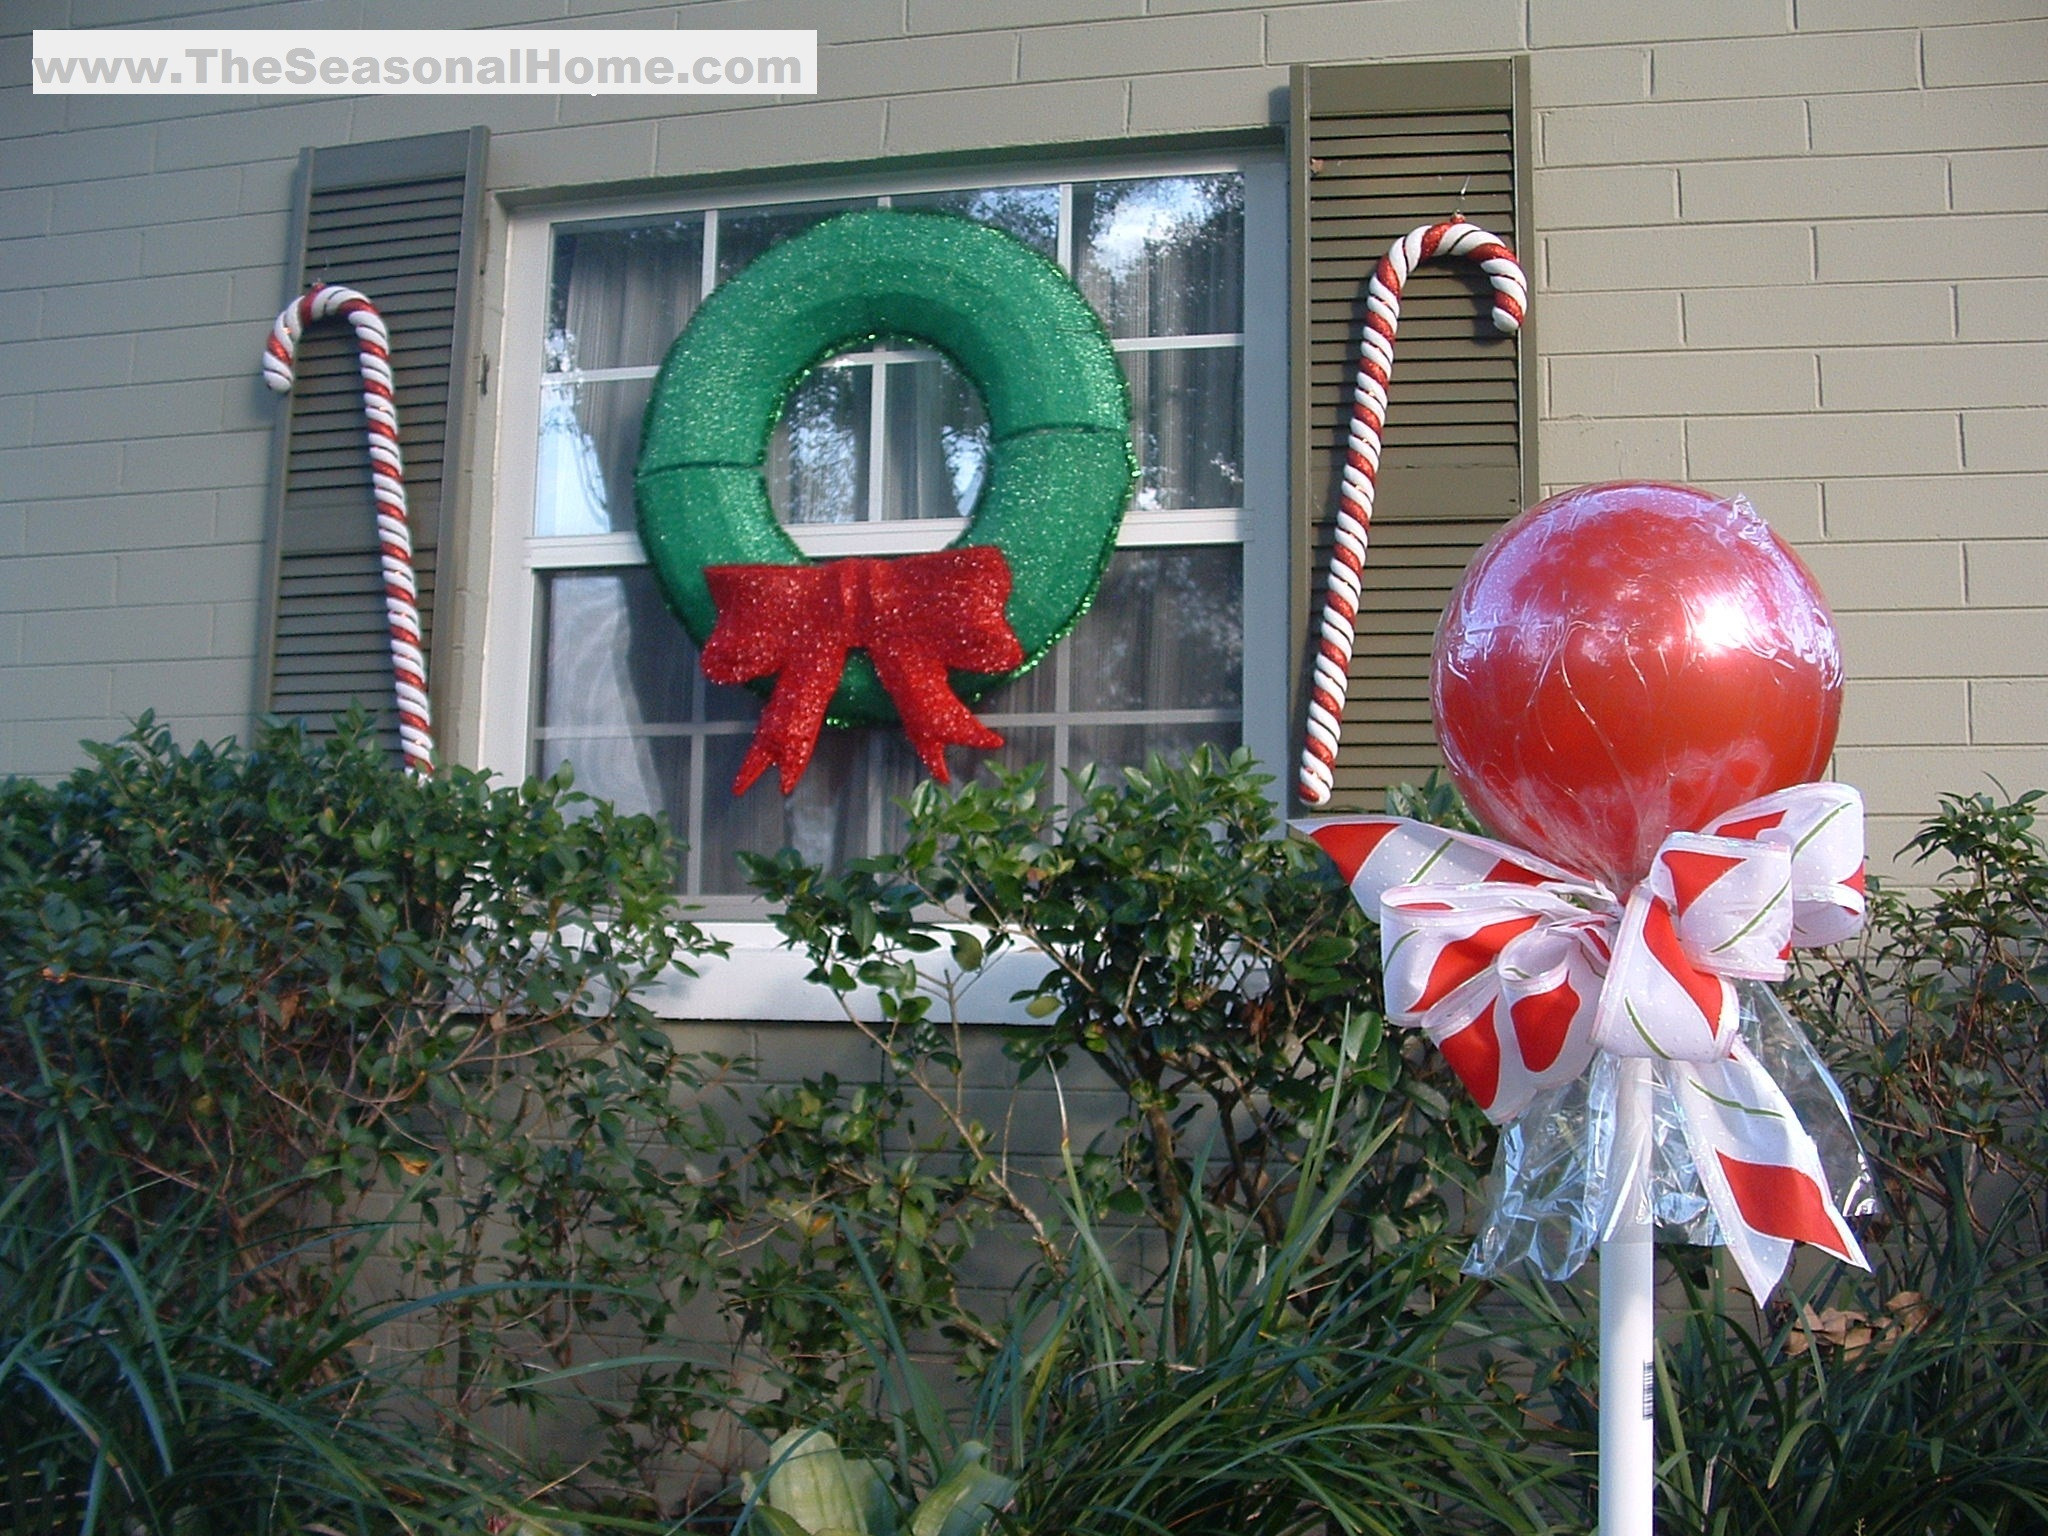 DIY Outdoor Lawn Christmas Decorations
 Outdoor “CANDY” A Christmas Decorating Idea The